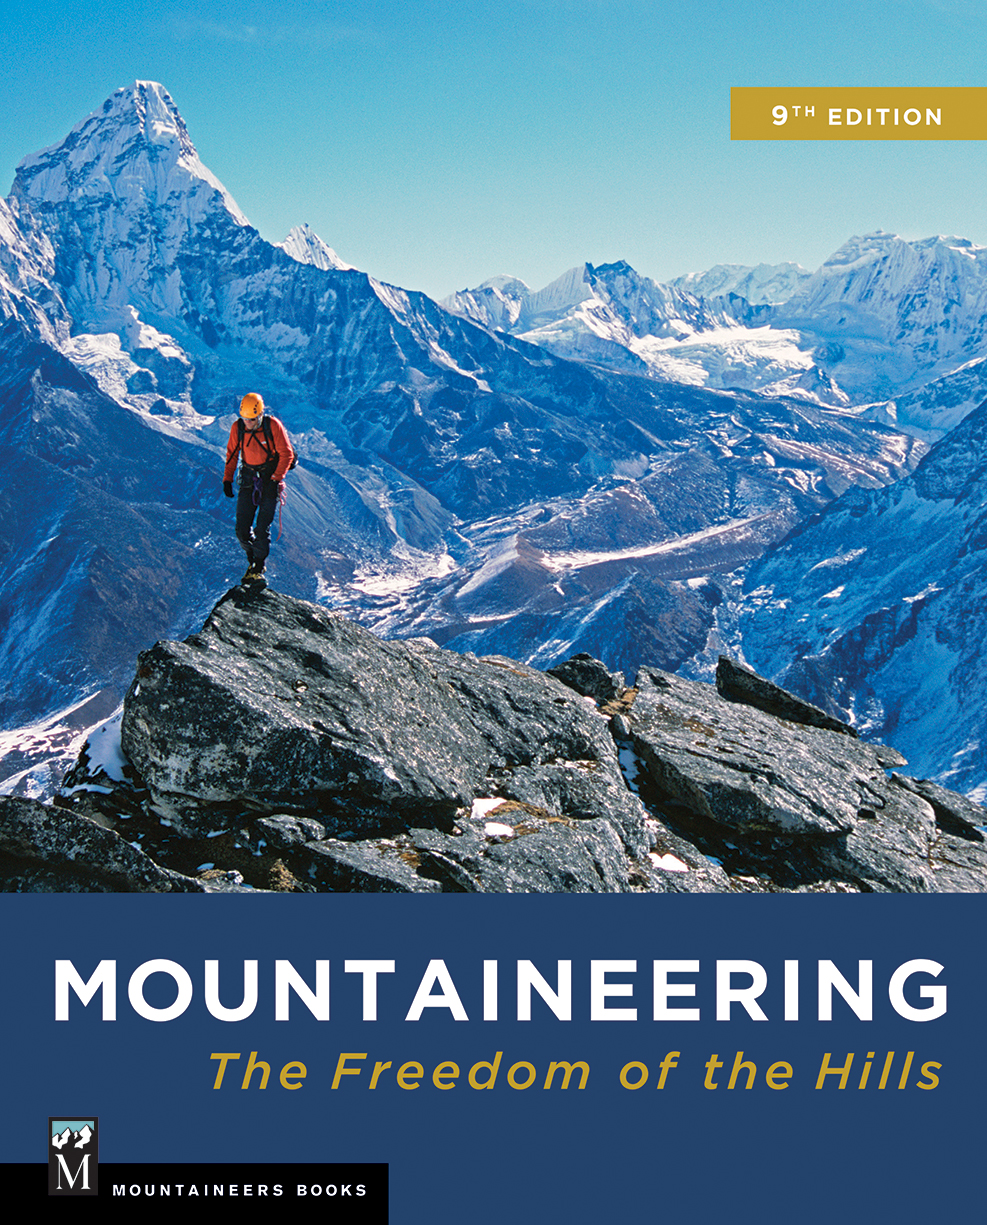 www.mountaineers.org